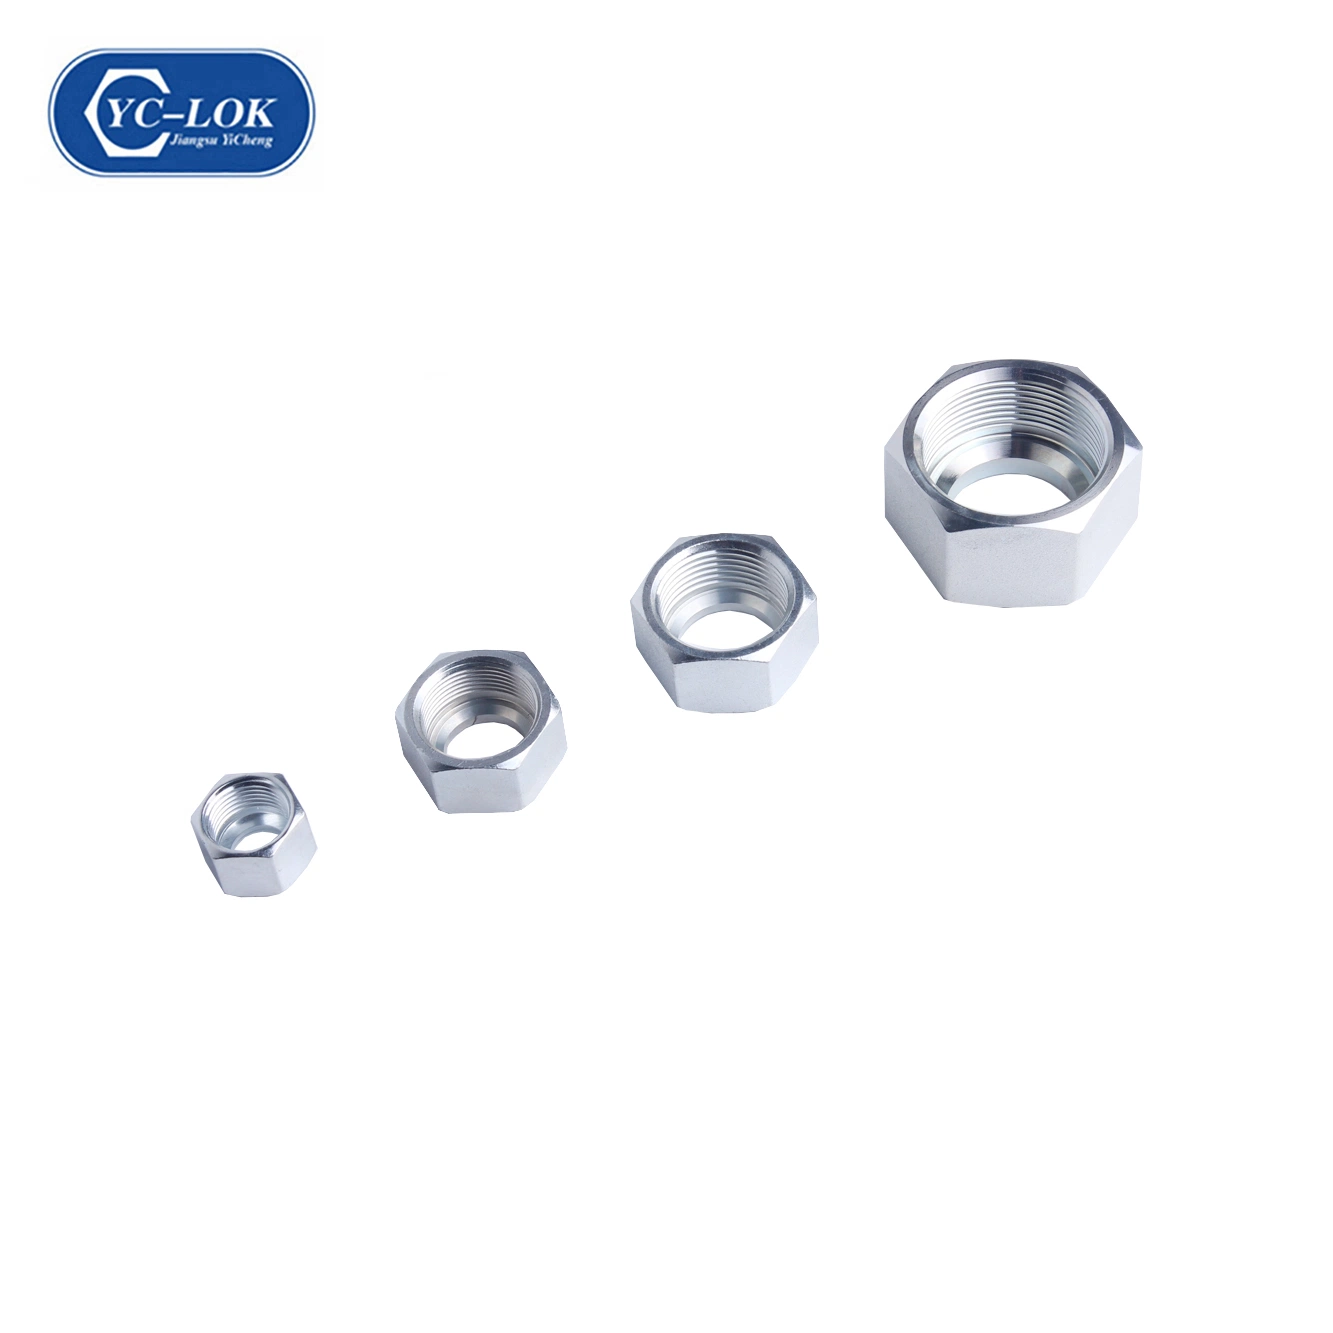 Metric L S Series Rataining Nuts Hydraulic Hose Fitting Nuts